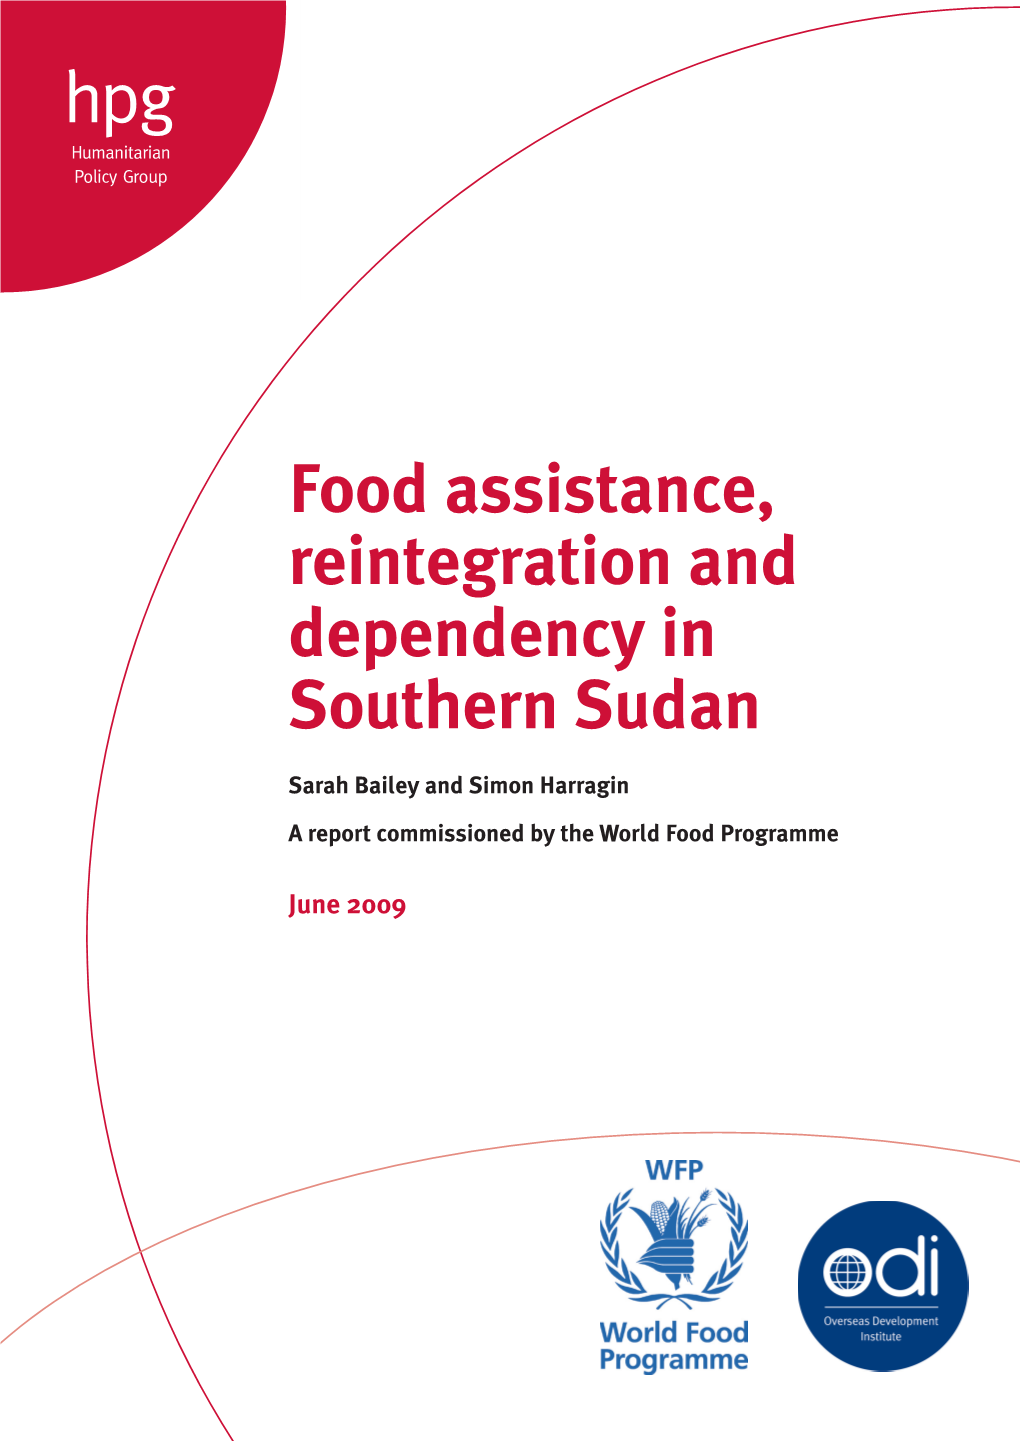 Food Assistance, Reintegration and Dependency in Southern Sudan